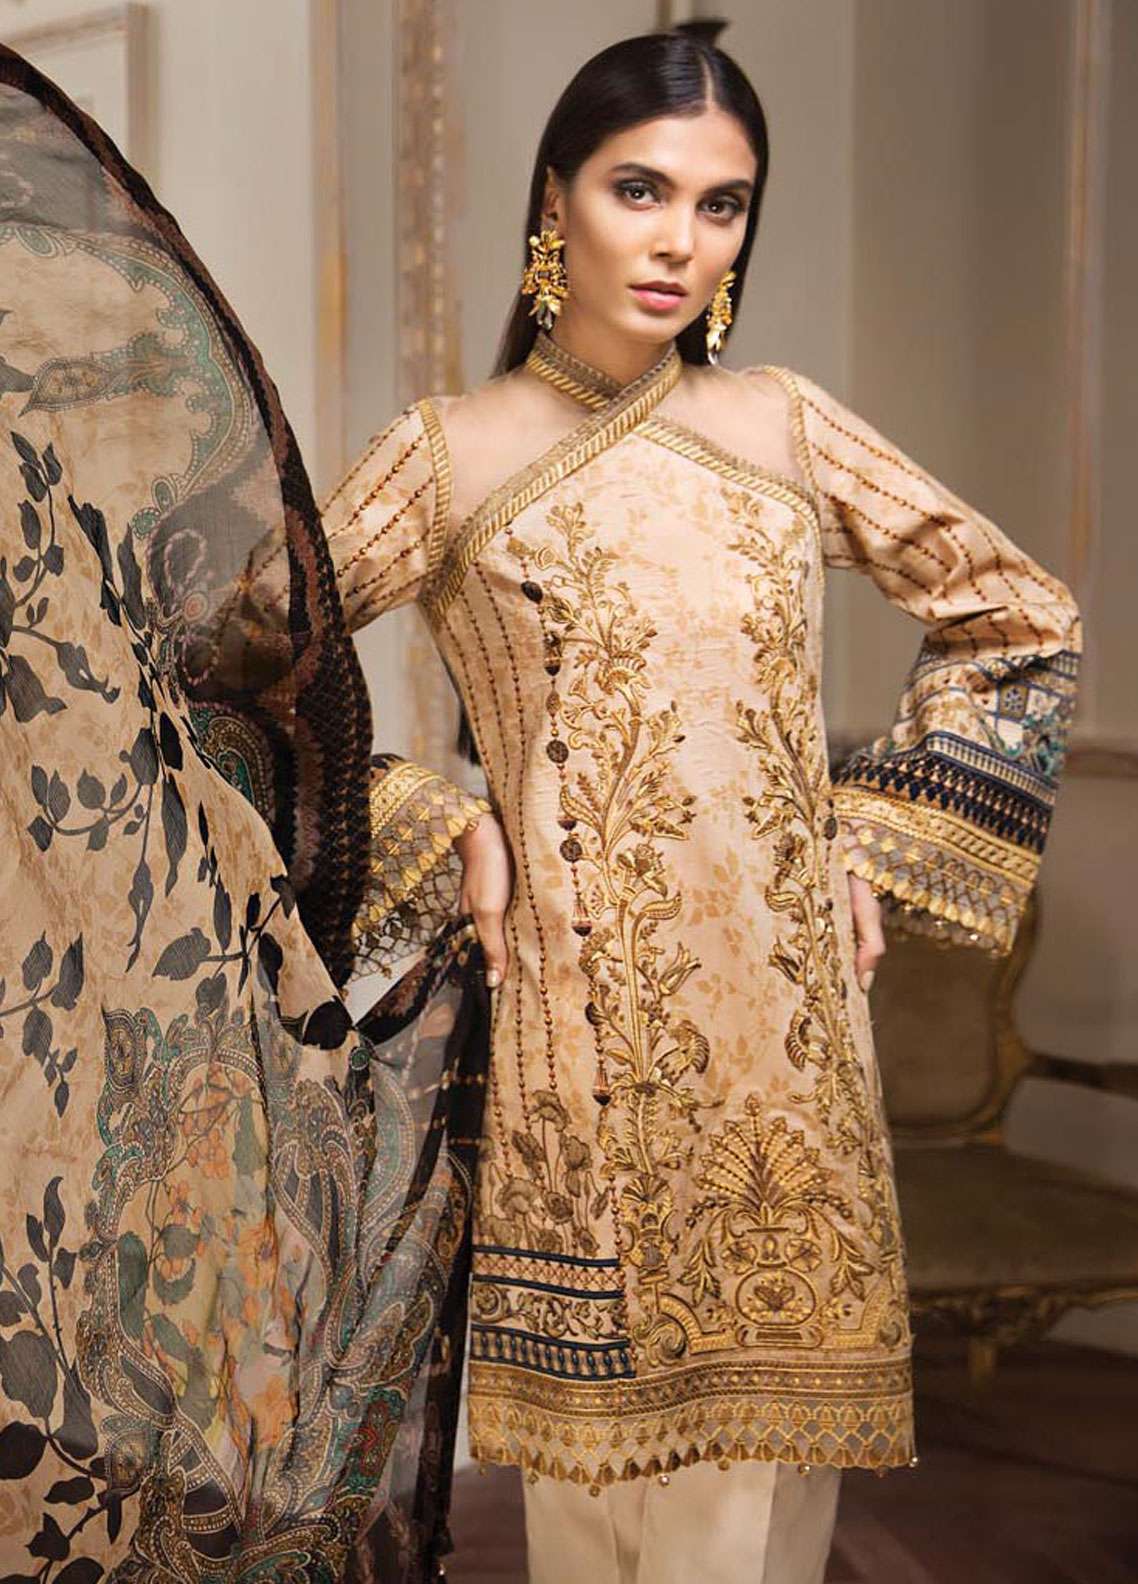 Anaya by Kiran Chaudhry Embroidered Lawn Unstitched 3 Piece Suit - 09 Gala - Summer Collection